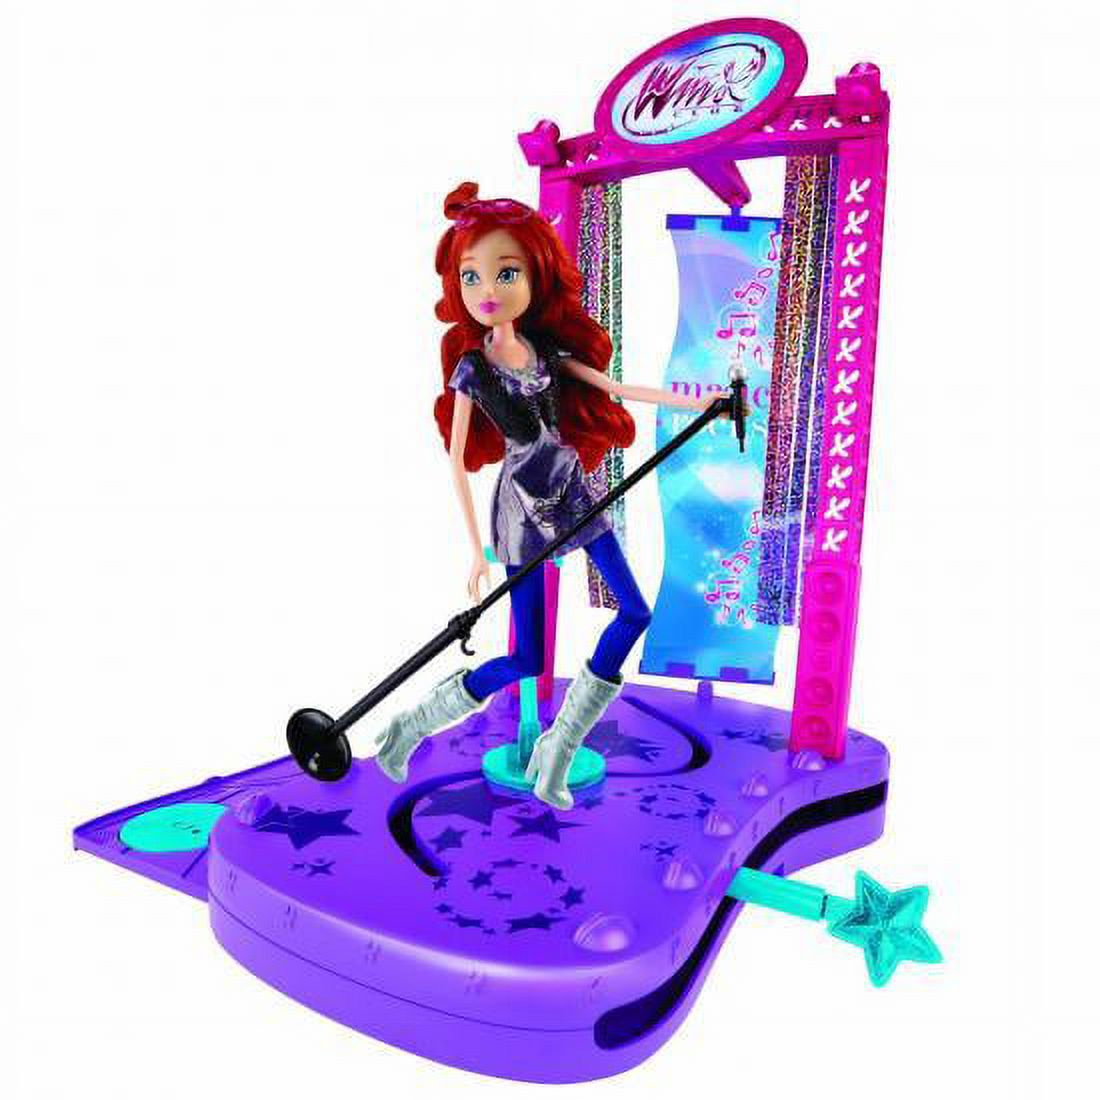 Winx Club Concert Stage Doll Playset - image 1 of 2